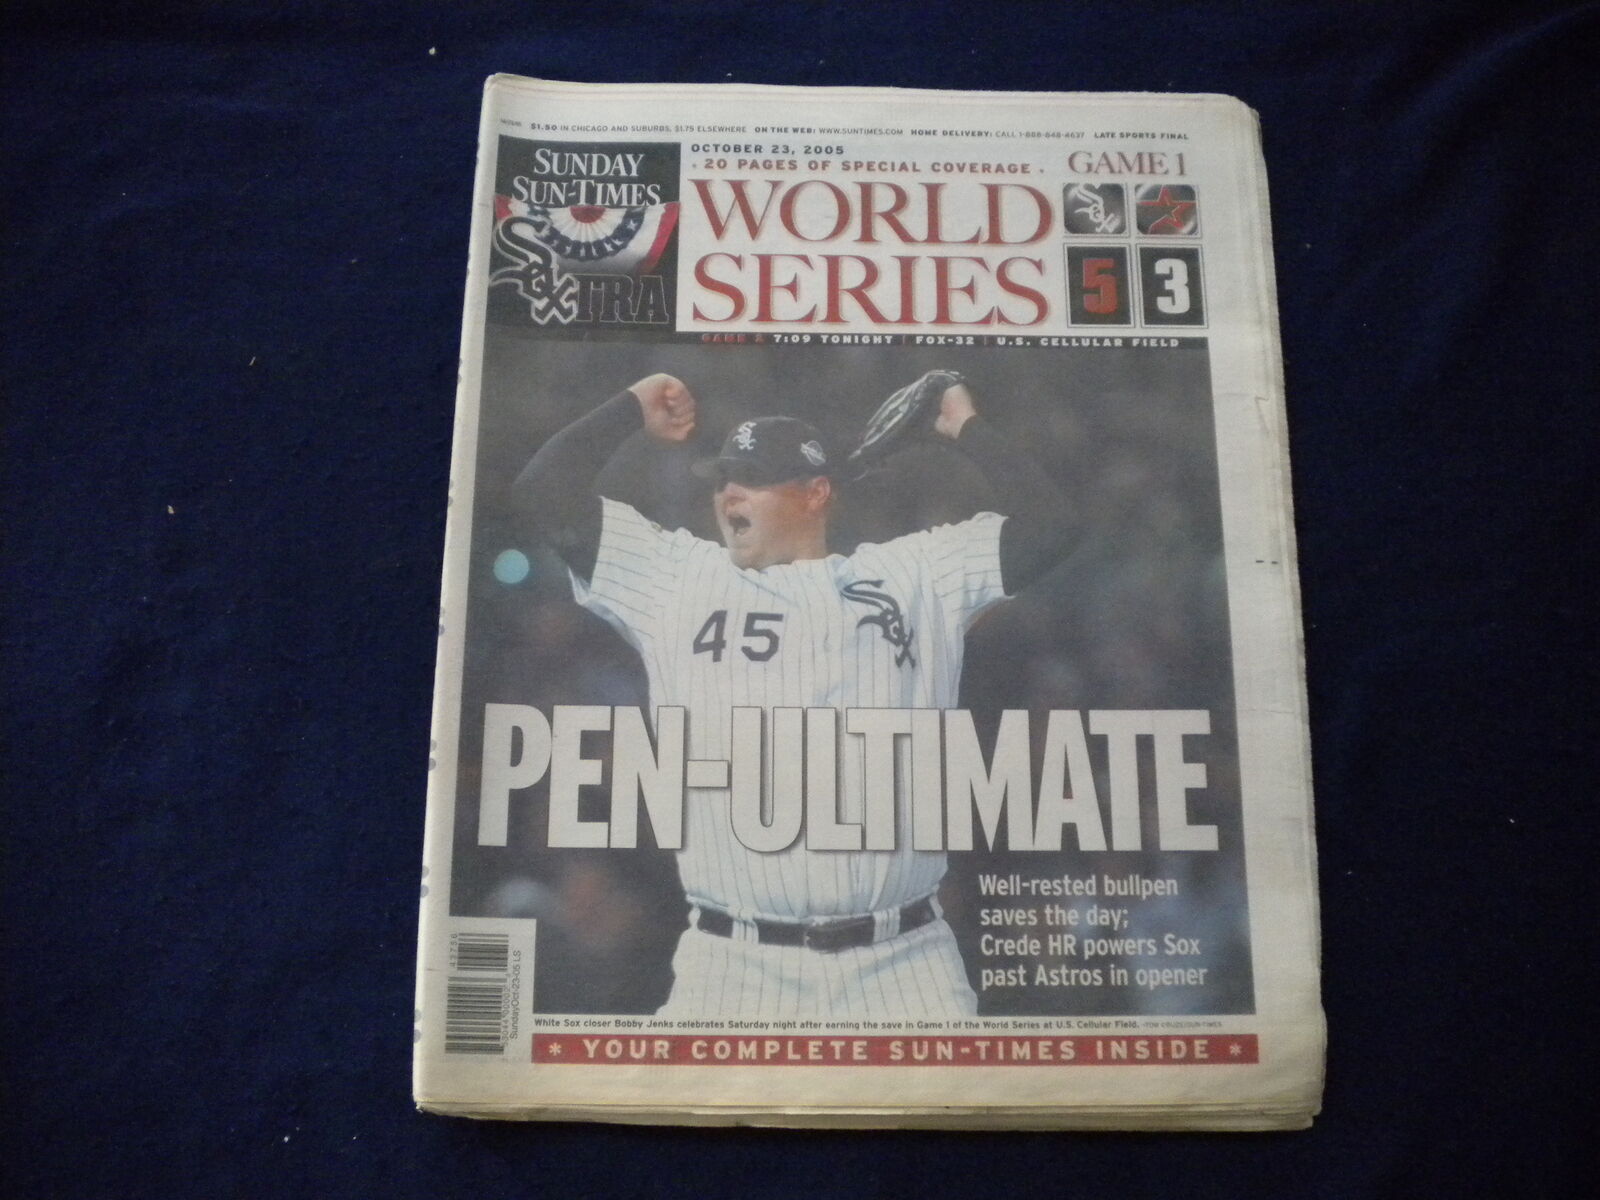 2005 OCTOBER 23 CHICAGO SUN-TIMES NEWSPAPER - WORLD SERIES GAME 1 - NP 5952